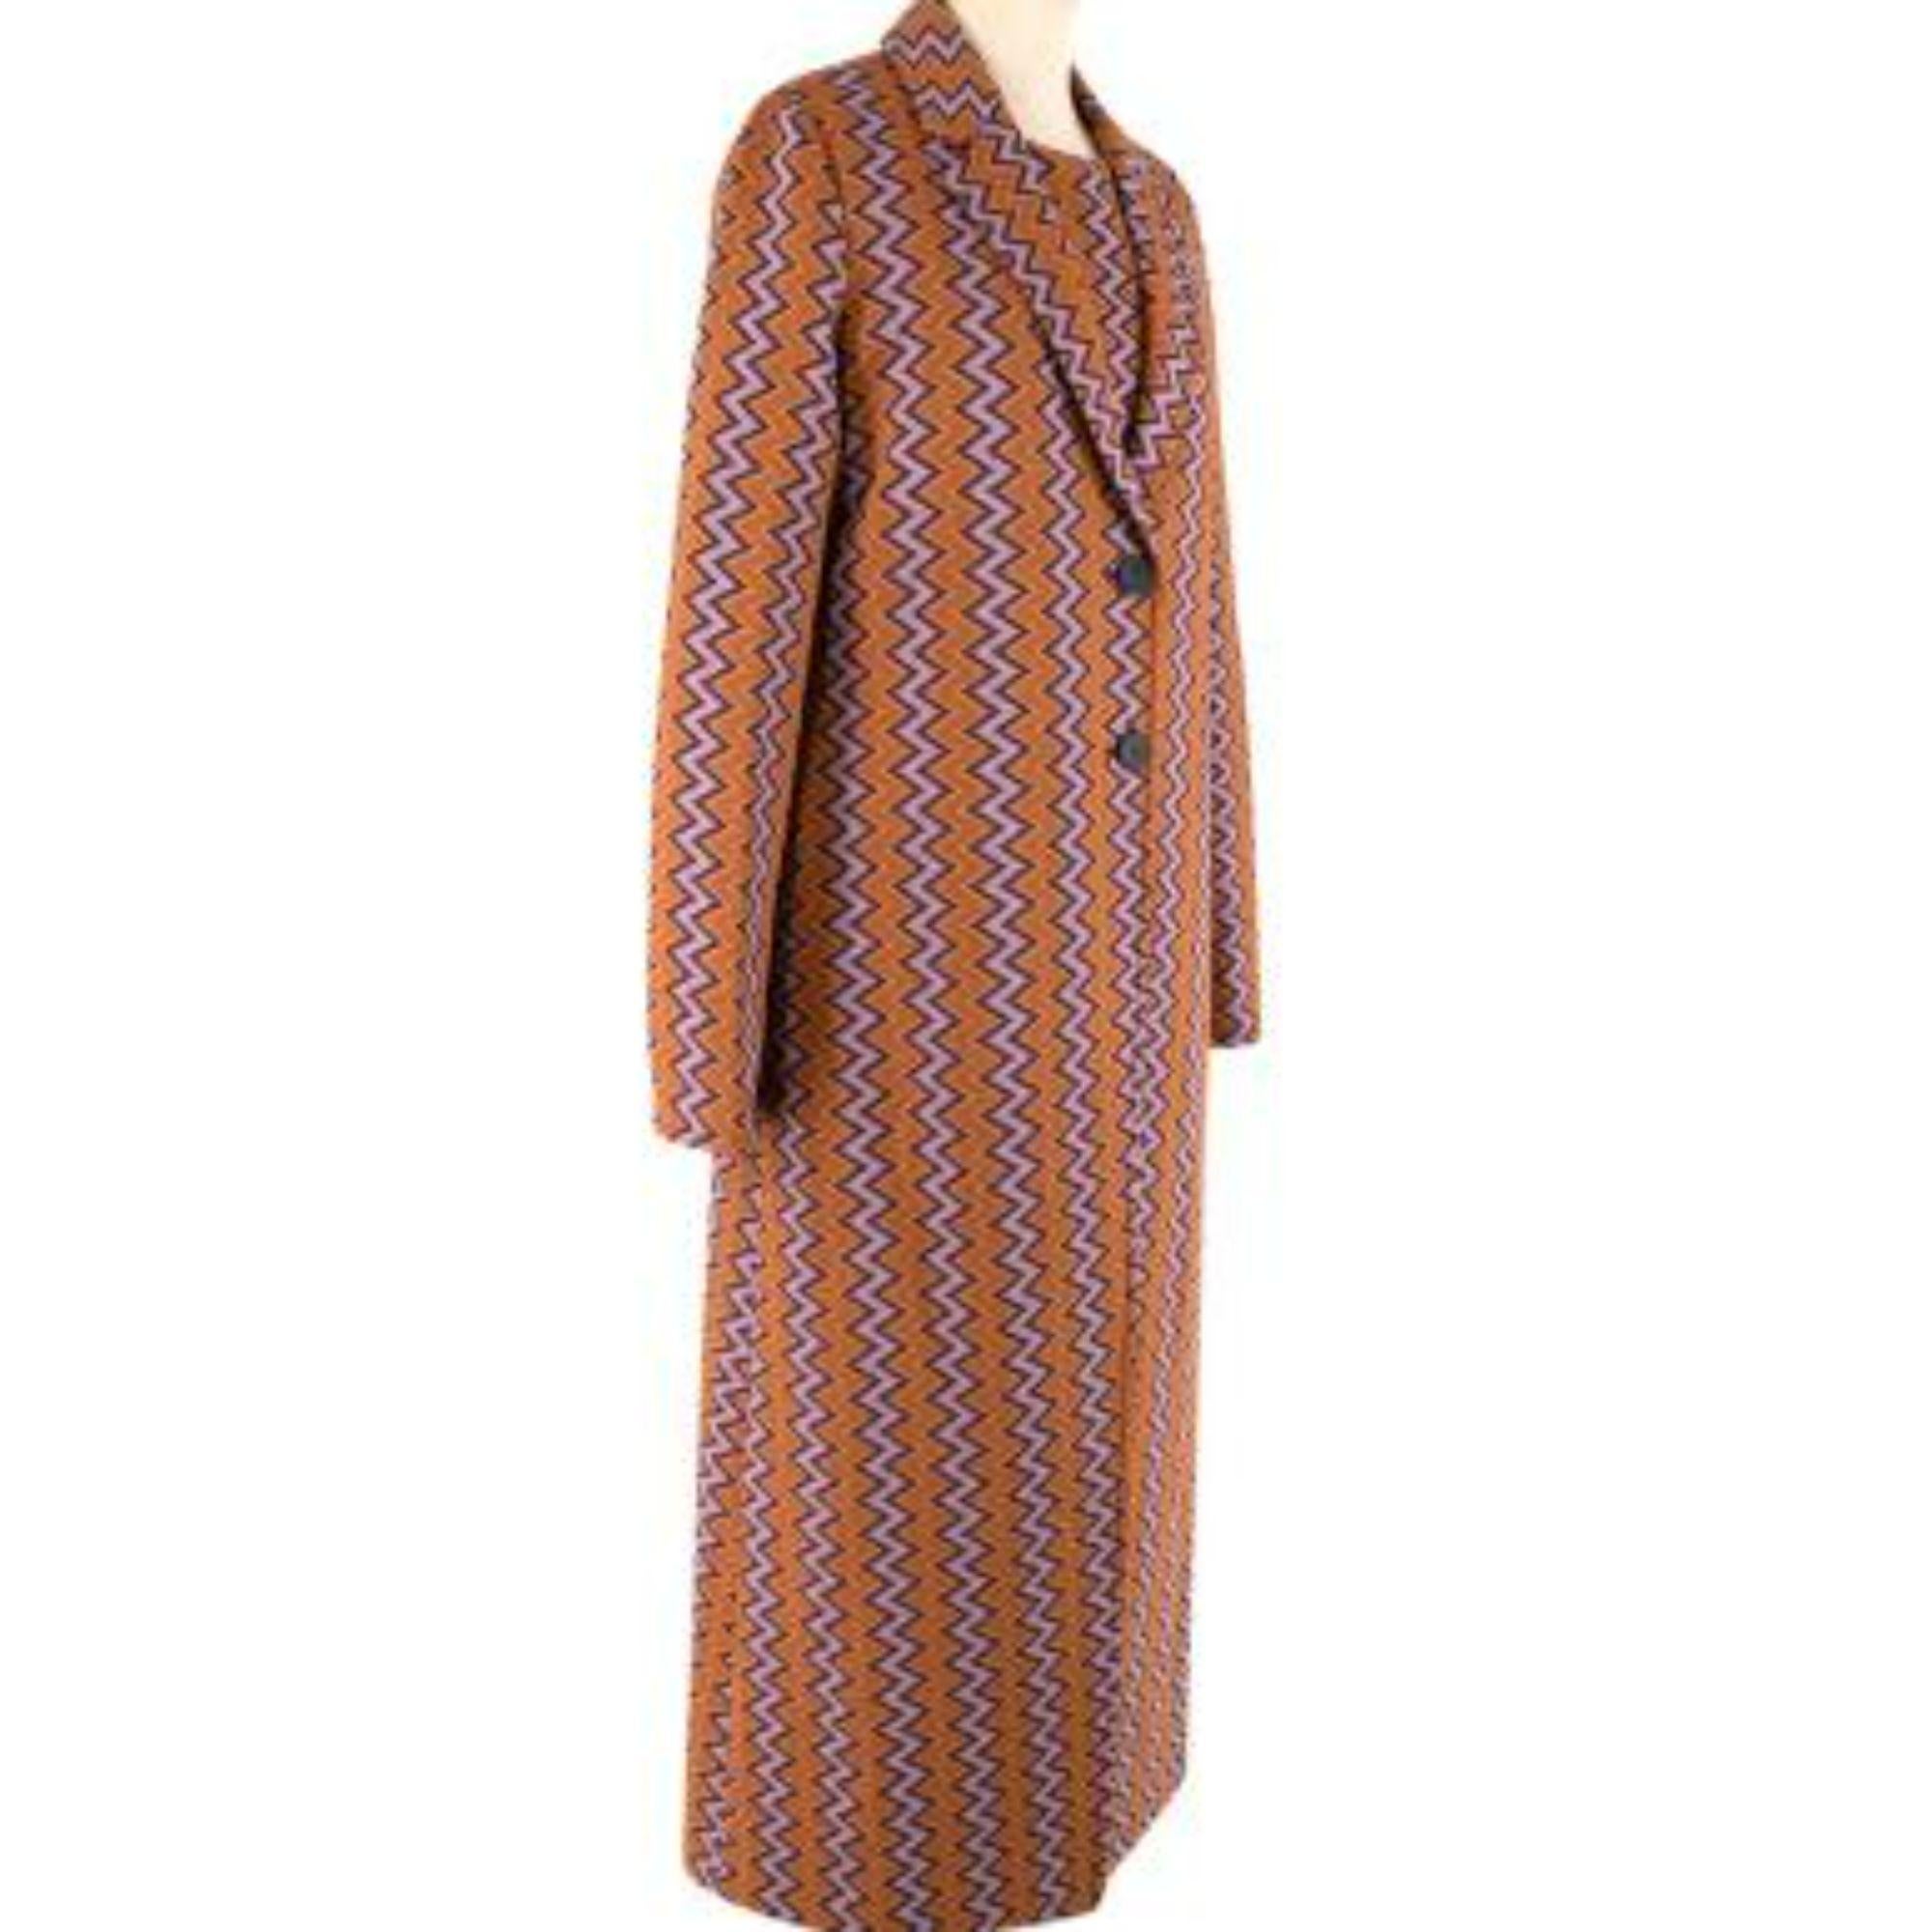 Missoni M Orange Zig Zag Printed Coat & Dress Suit In Excellent Condition For Sale In London, GB